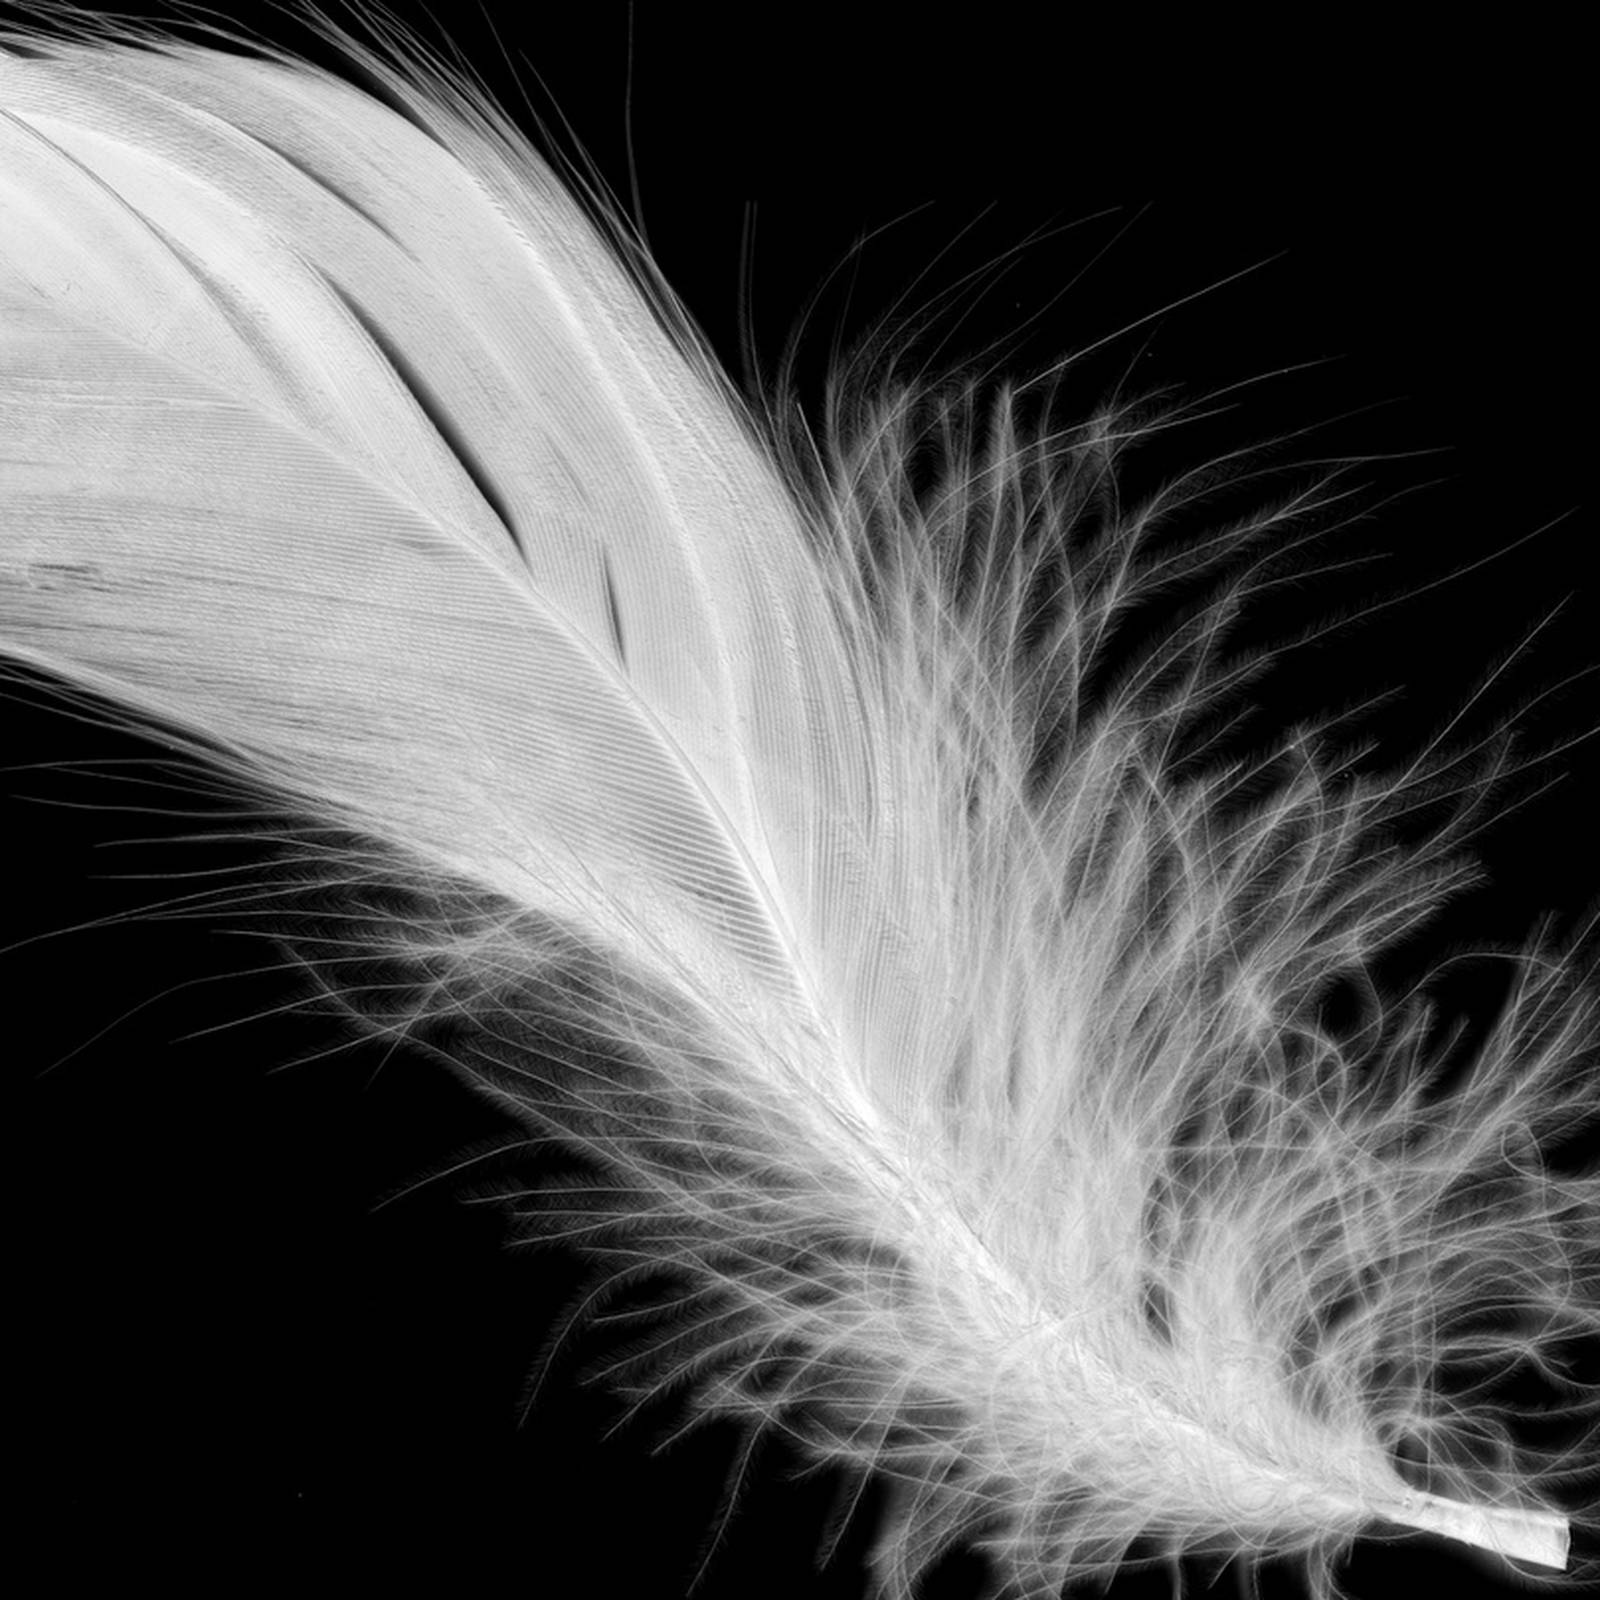 Why receiving a white feather during WWI embarrassed a generation of young  men - History Skills